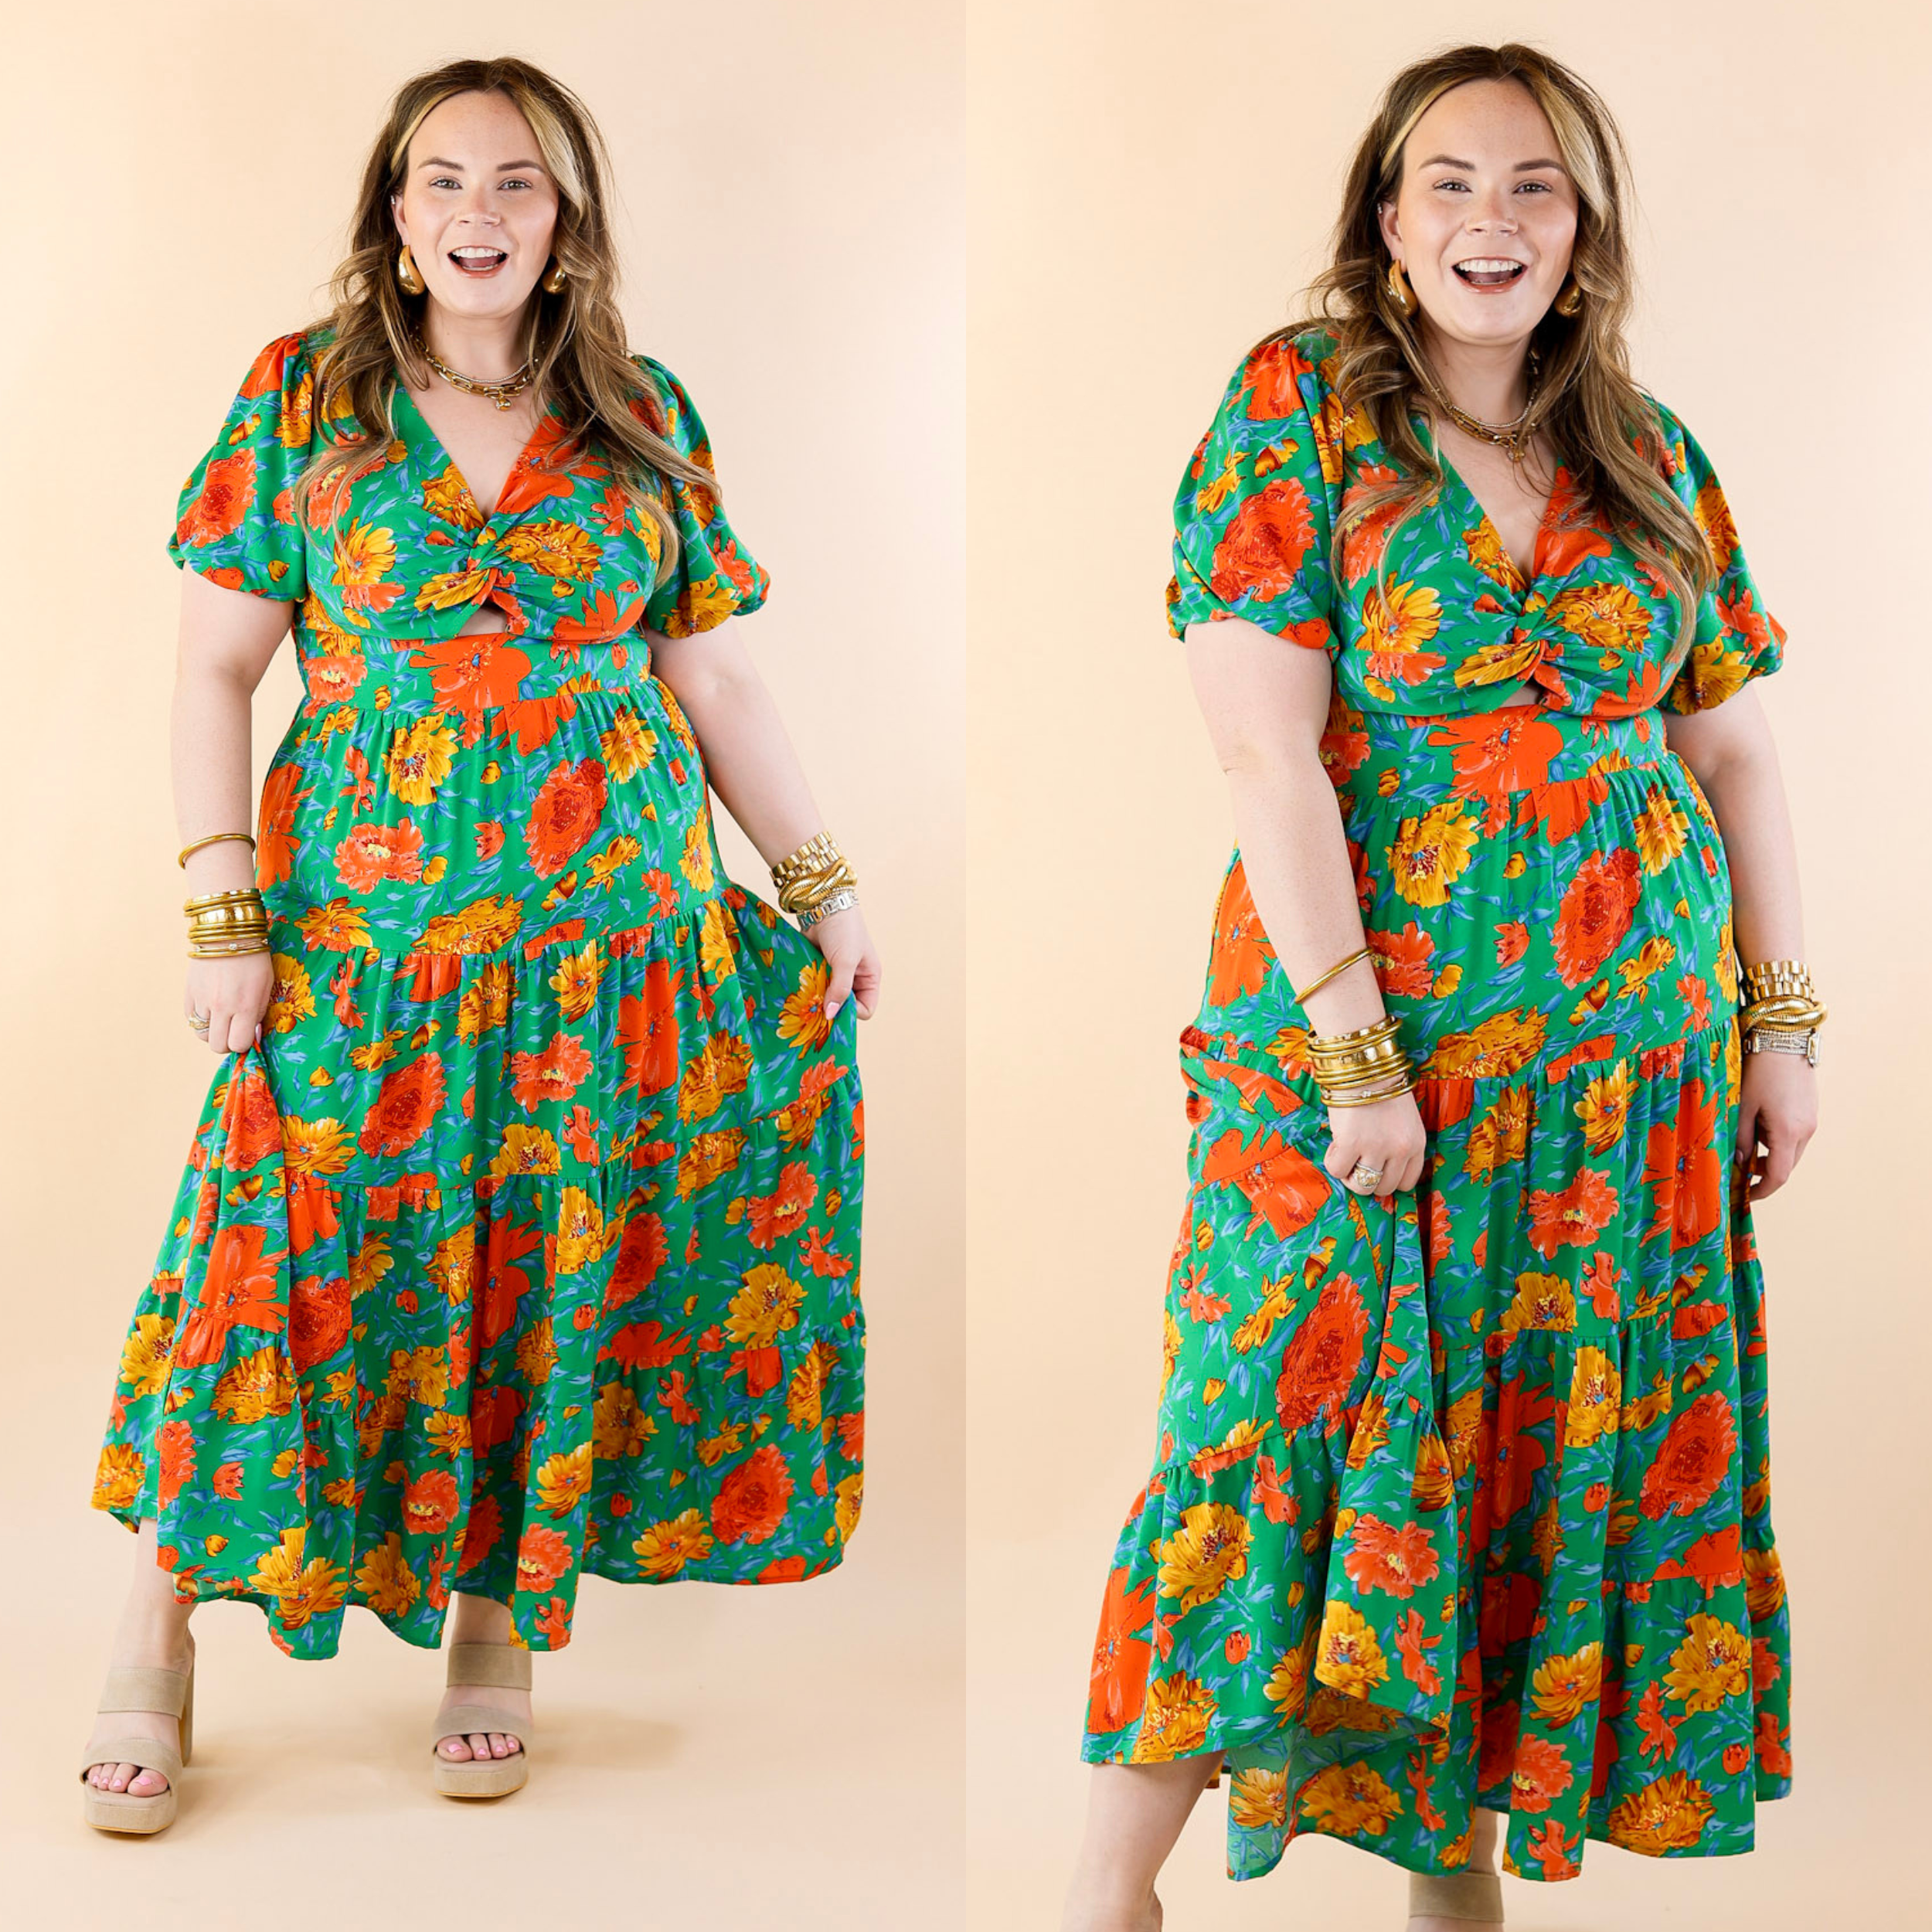 Botanical Bliss Floral Tiered Maxi Dress in Green - Giddy Up Glamour Boutique